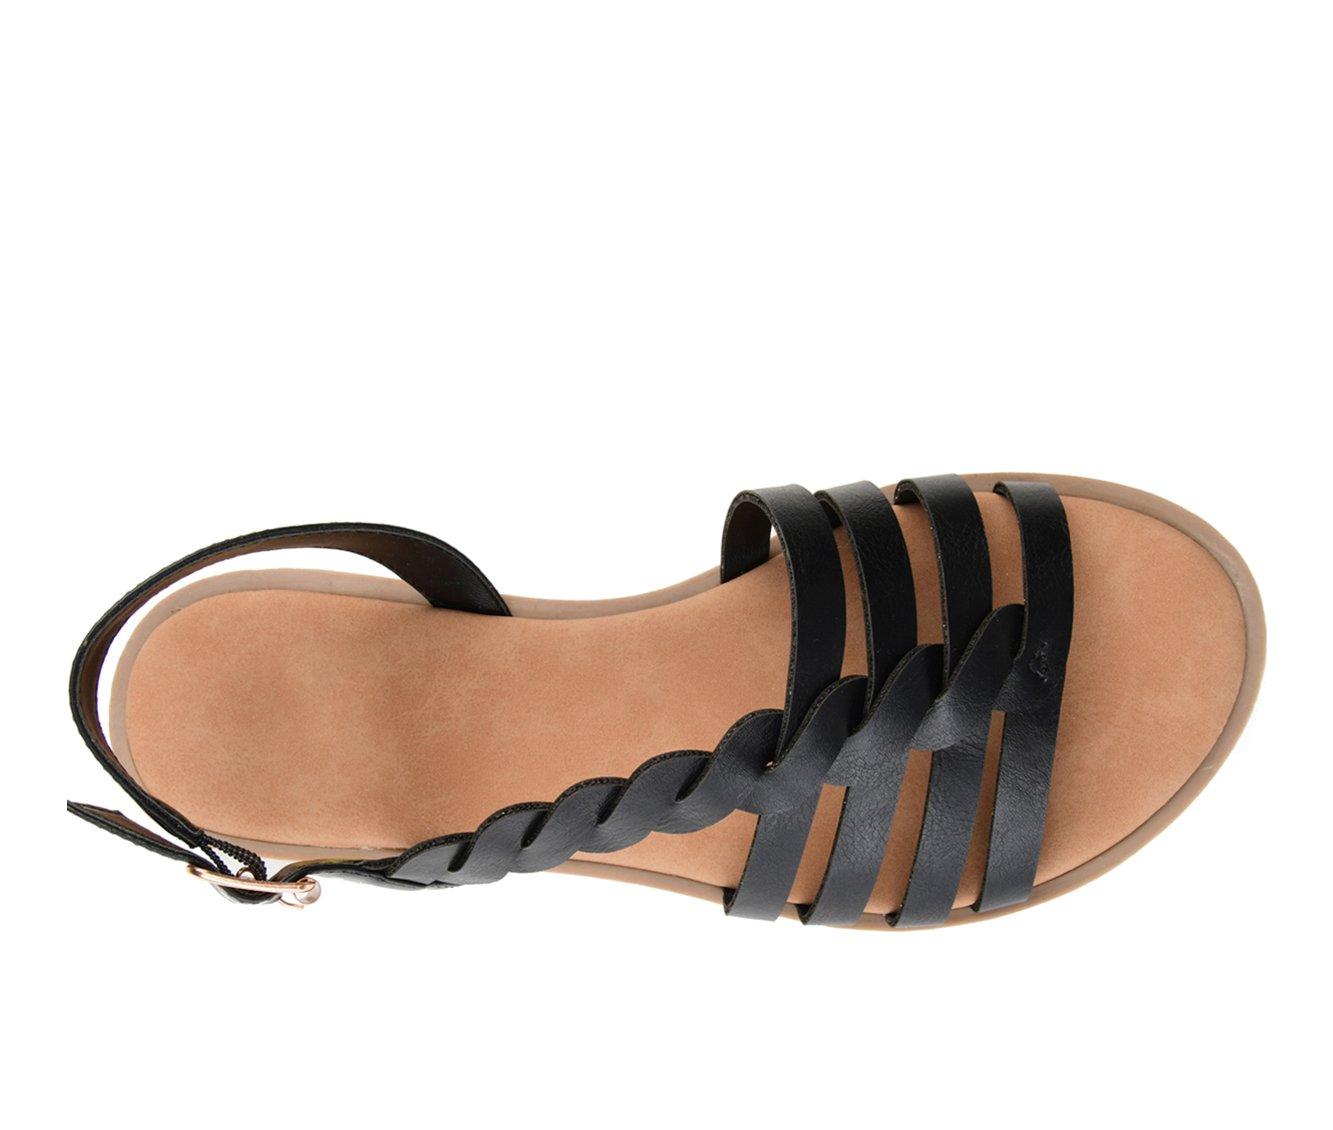 Women's Journee Collection Solay Sandals